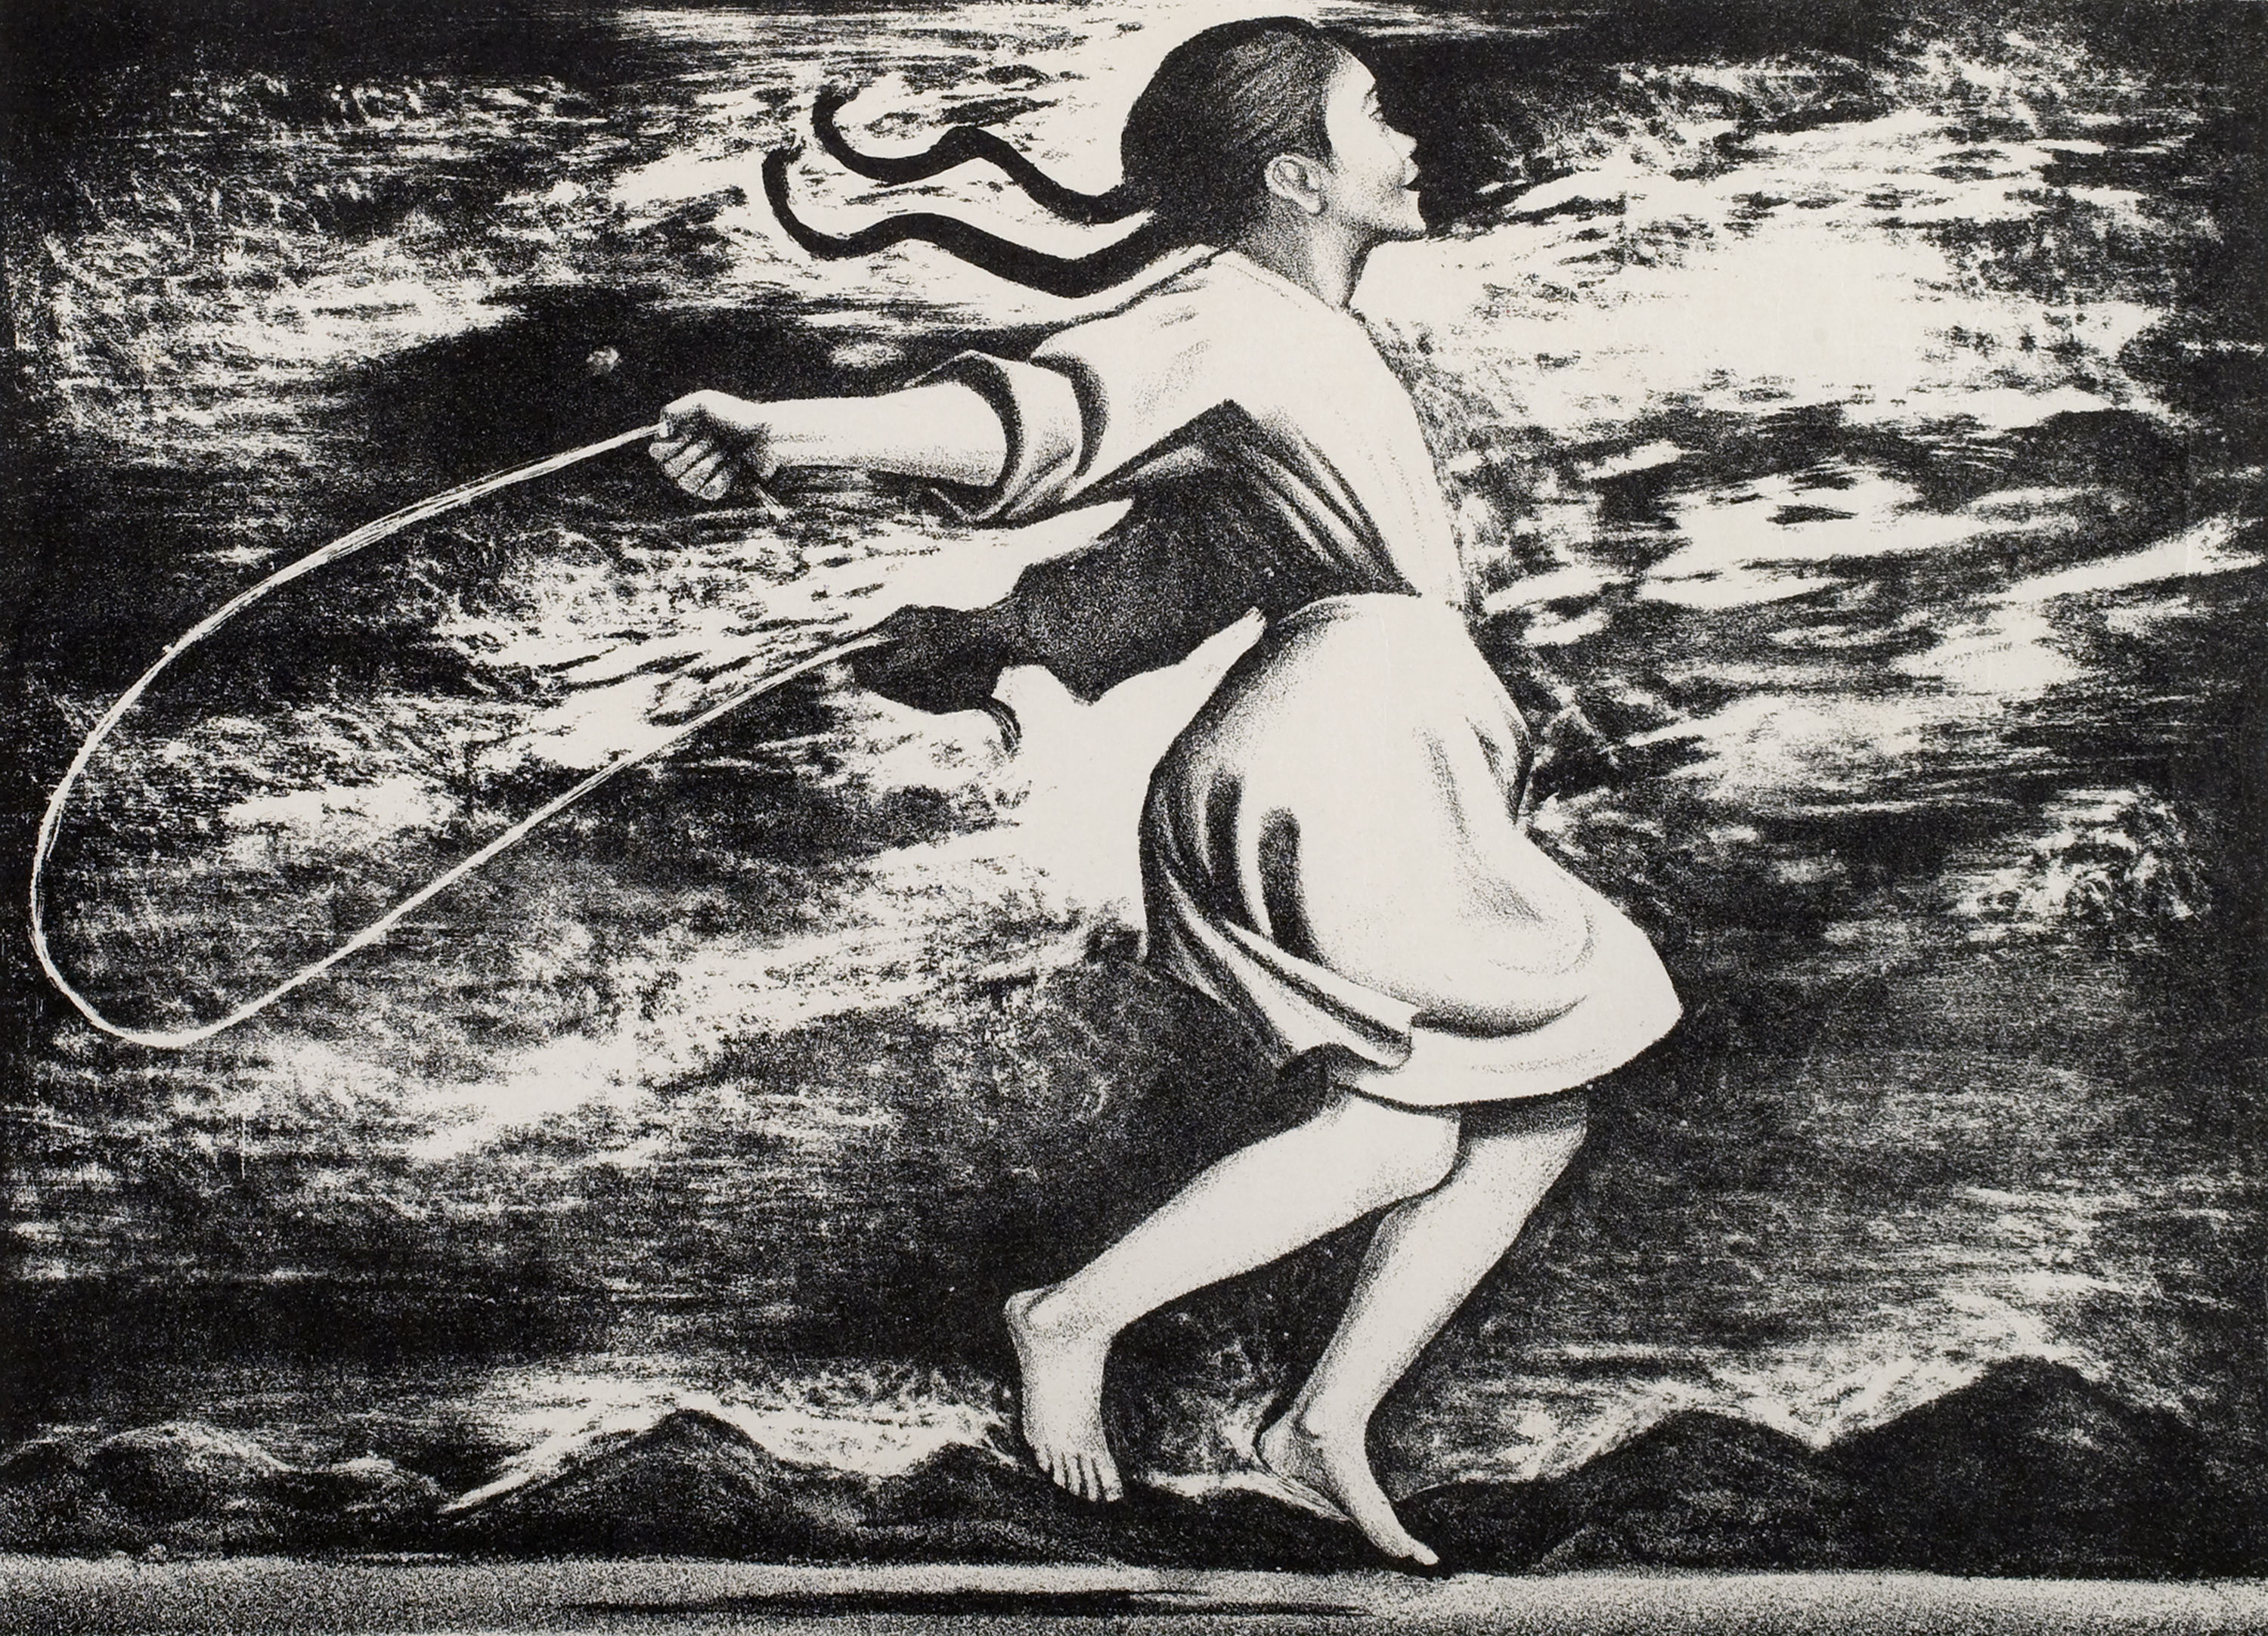 Elizabeth Catlett (American and Mexican, 1915-2012), ‘Untitled (Girl Jumping Rope),’ 1958. Lithograph. Lent by Susan and David Goode. © 2022 Mora-Catlett Family / Licensed by VAGA at Artists Rights Society (ARS), NY